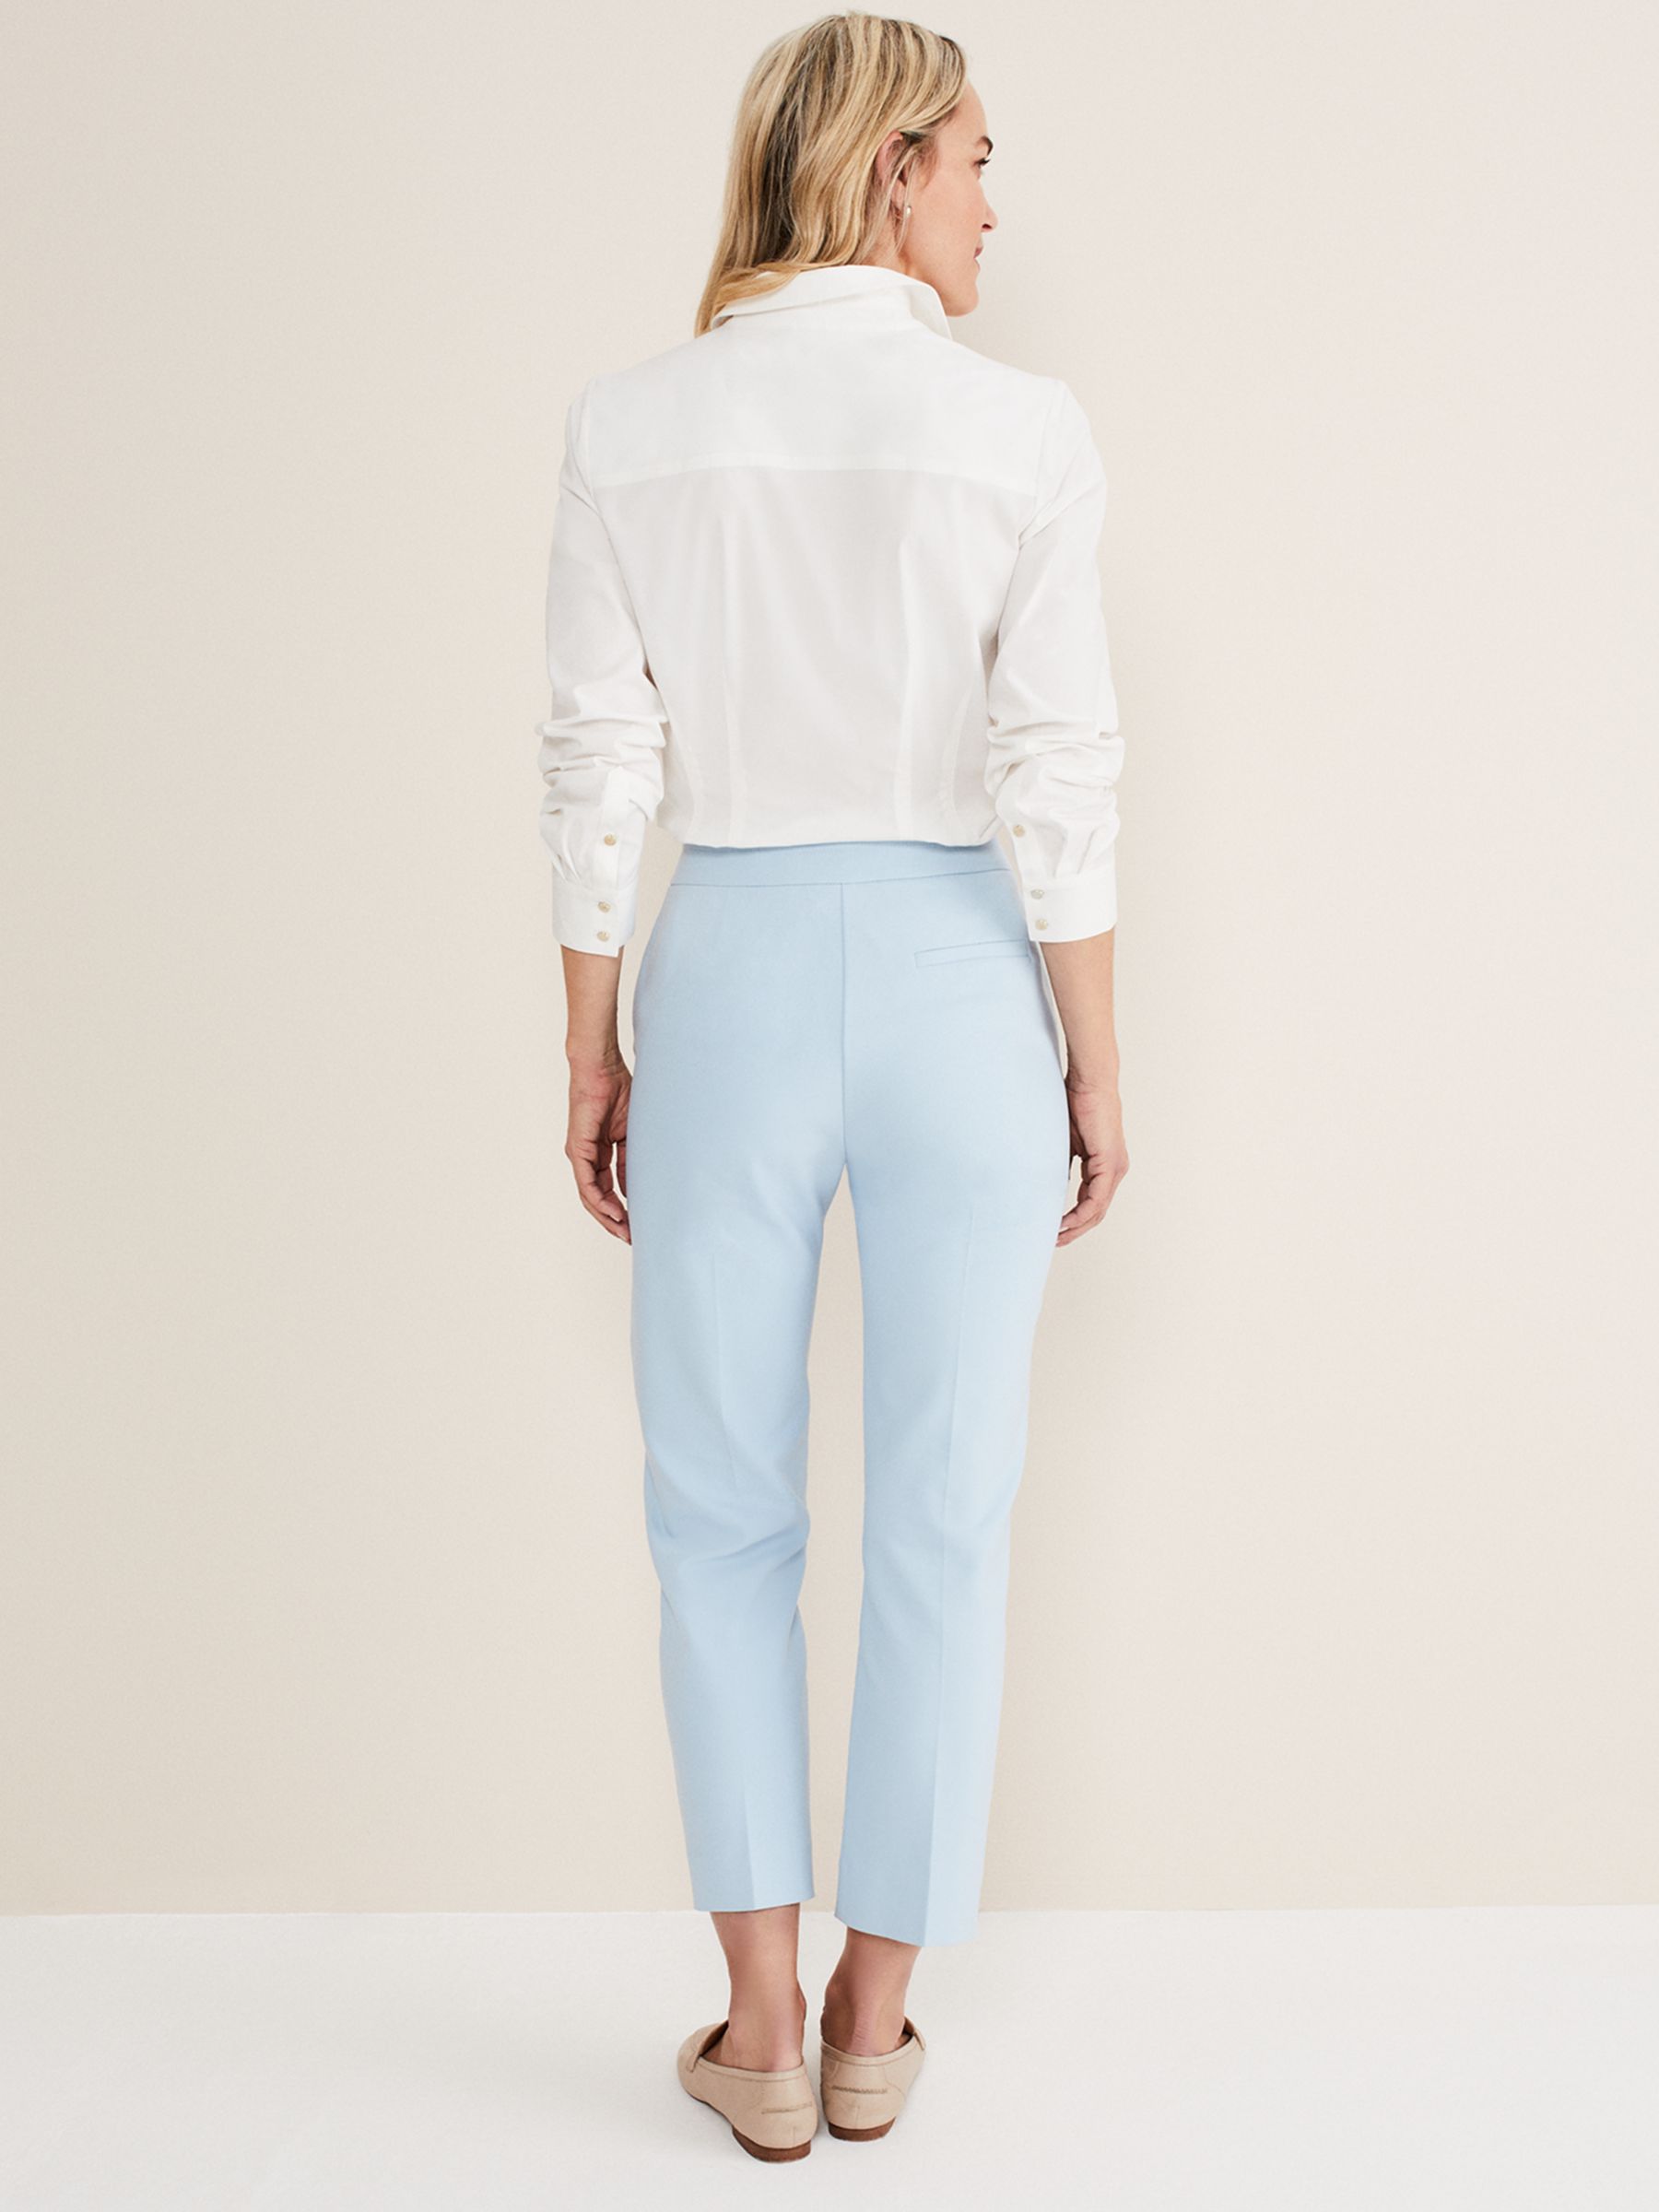 Phase Eight Julianna Cropped Cotton Blend Trousers, Cornflower Blue, 18